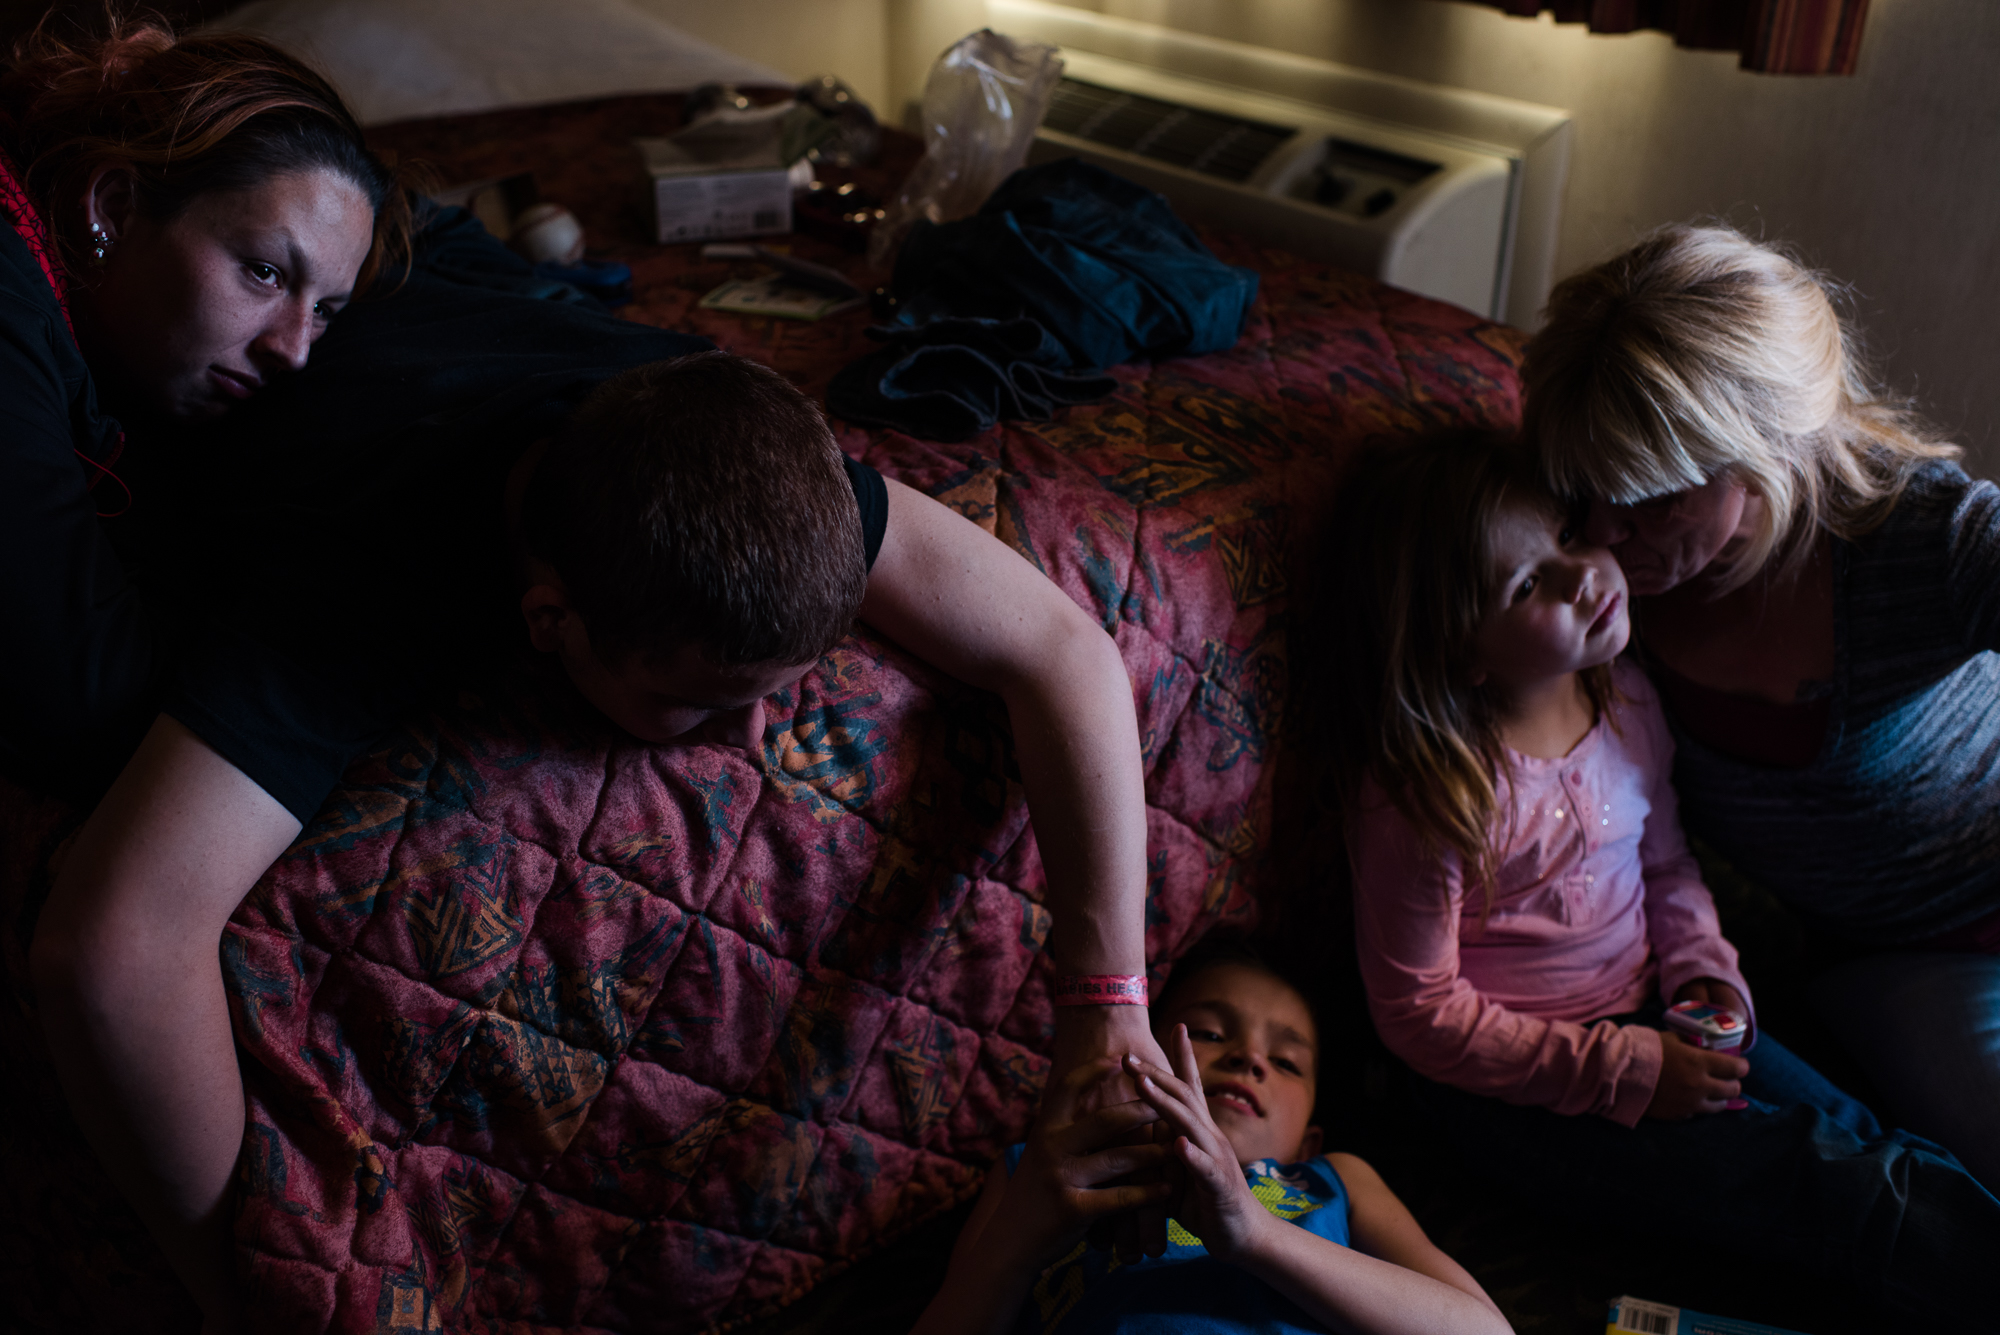  Vinny, age 16, tickles Michael, age 10, while Krystle rests her head on Vinny’s back; Eve sits with Elycia on the right side of the bed during a visit at Eddie’s motel room where Elycia and Michael live, 2015. 